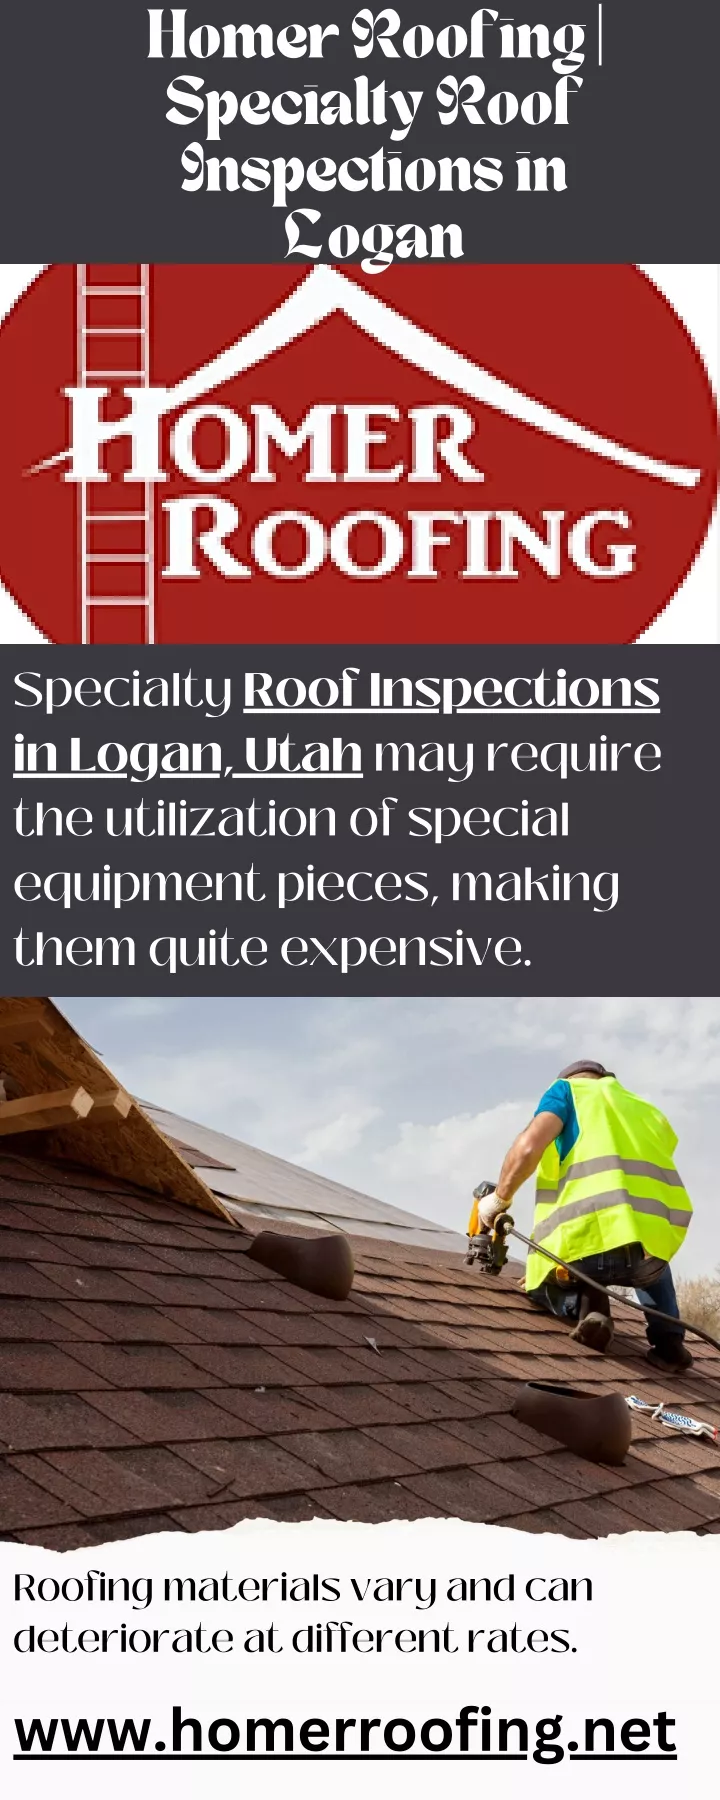 homer roofing specialty roof inspections in logan